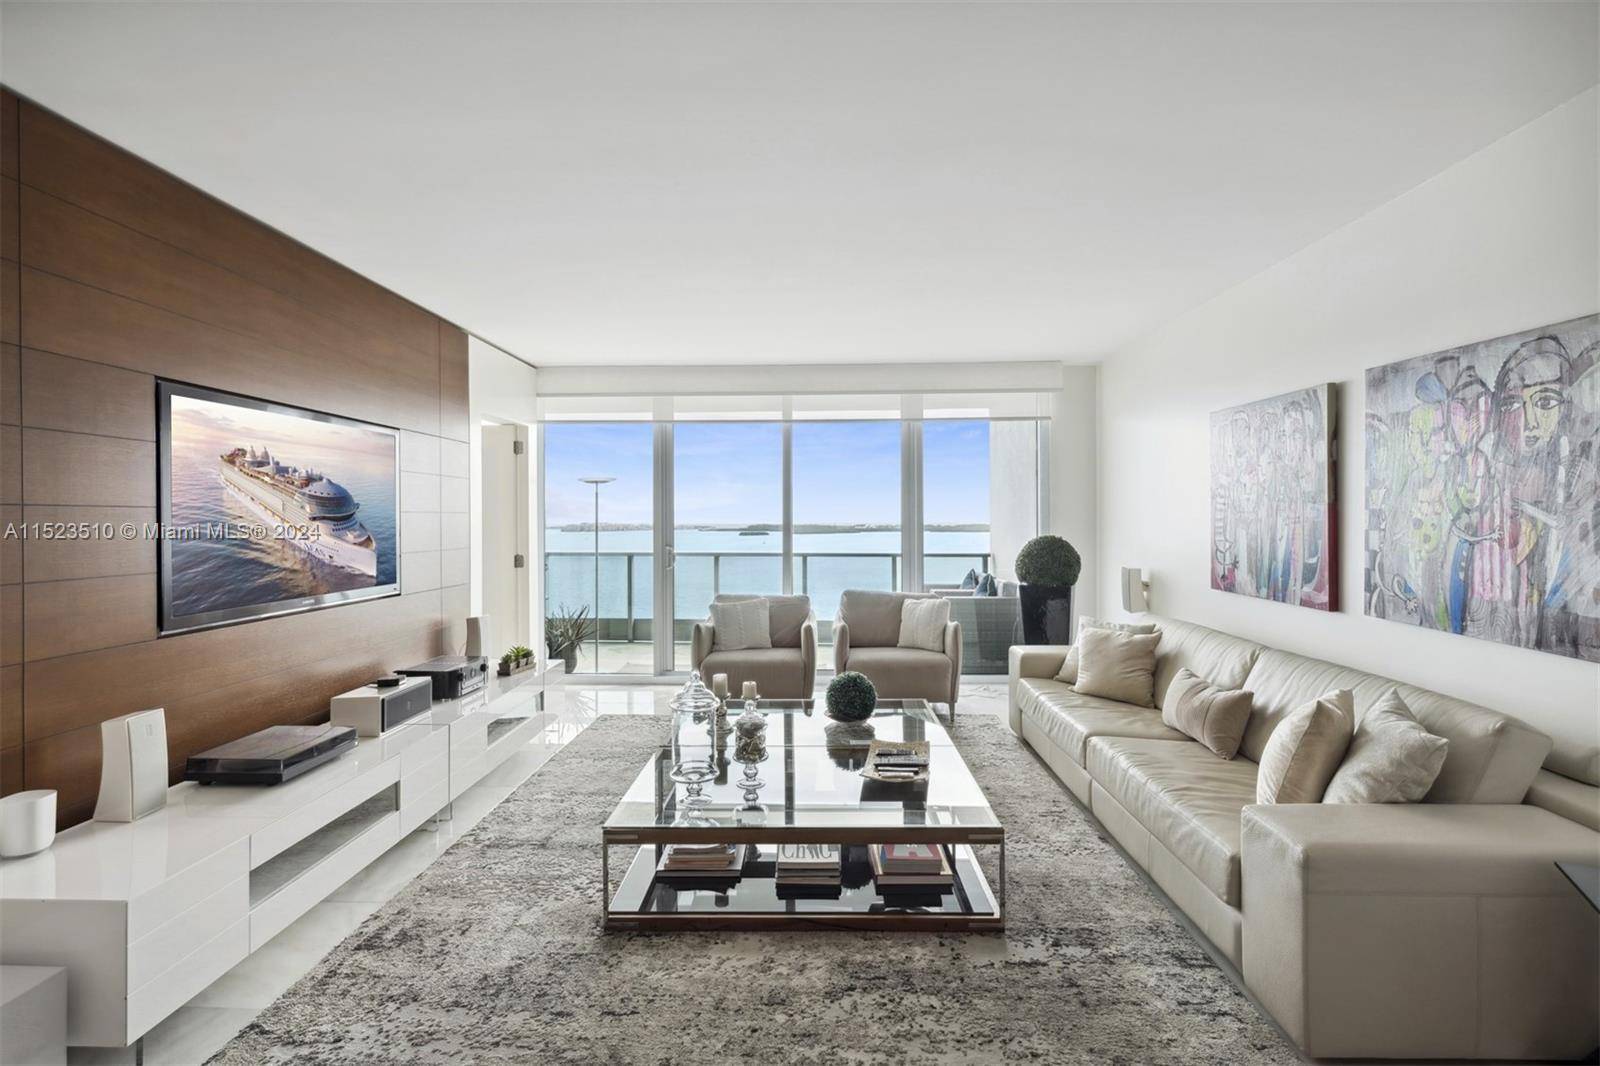 Uncover unmatched Biscayne Bay views from this gem in the Miami skyline.